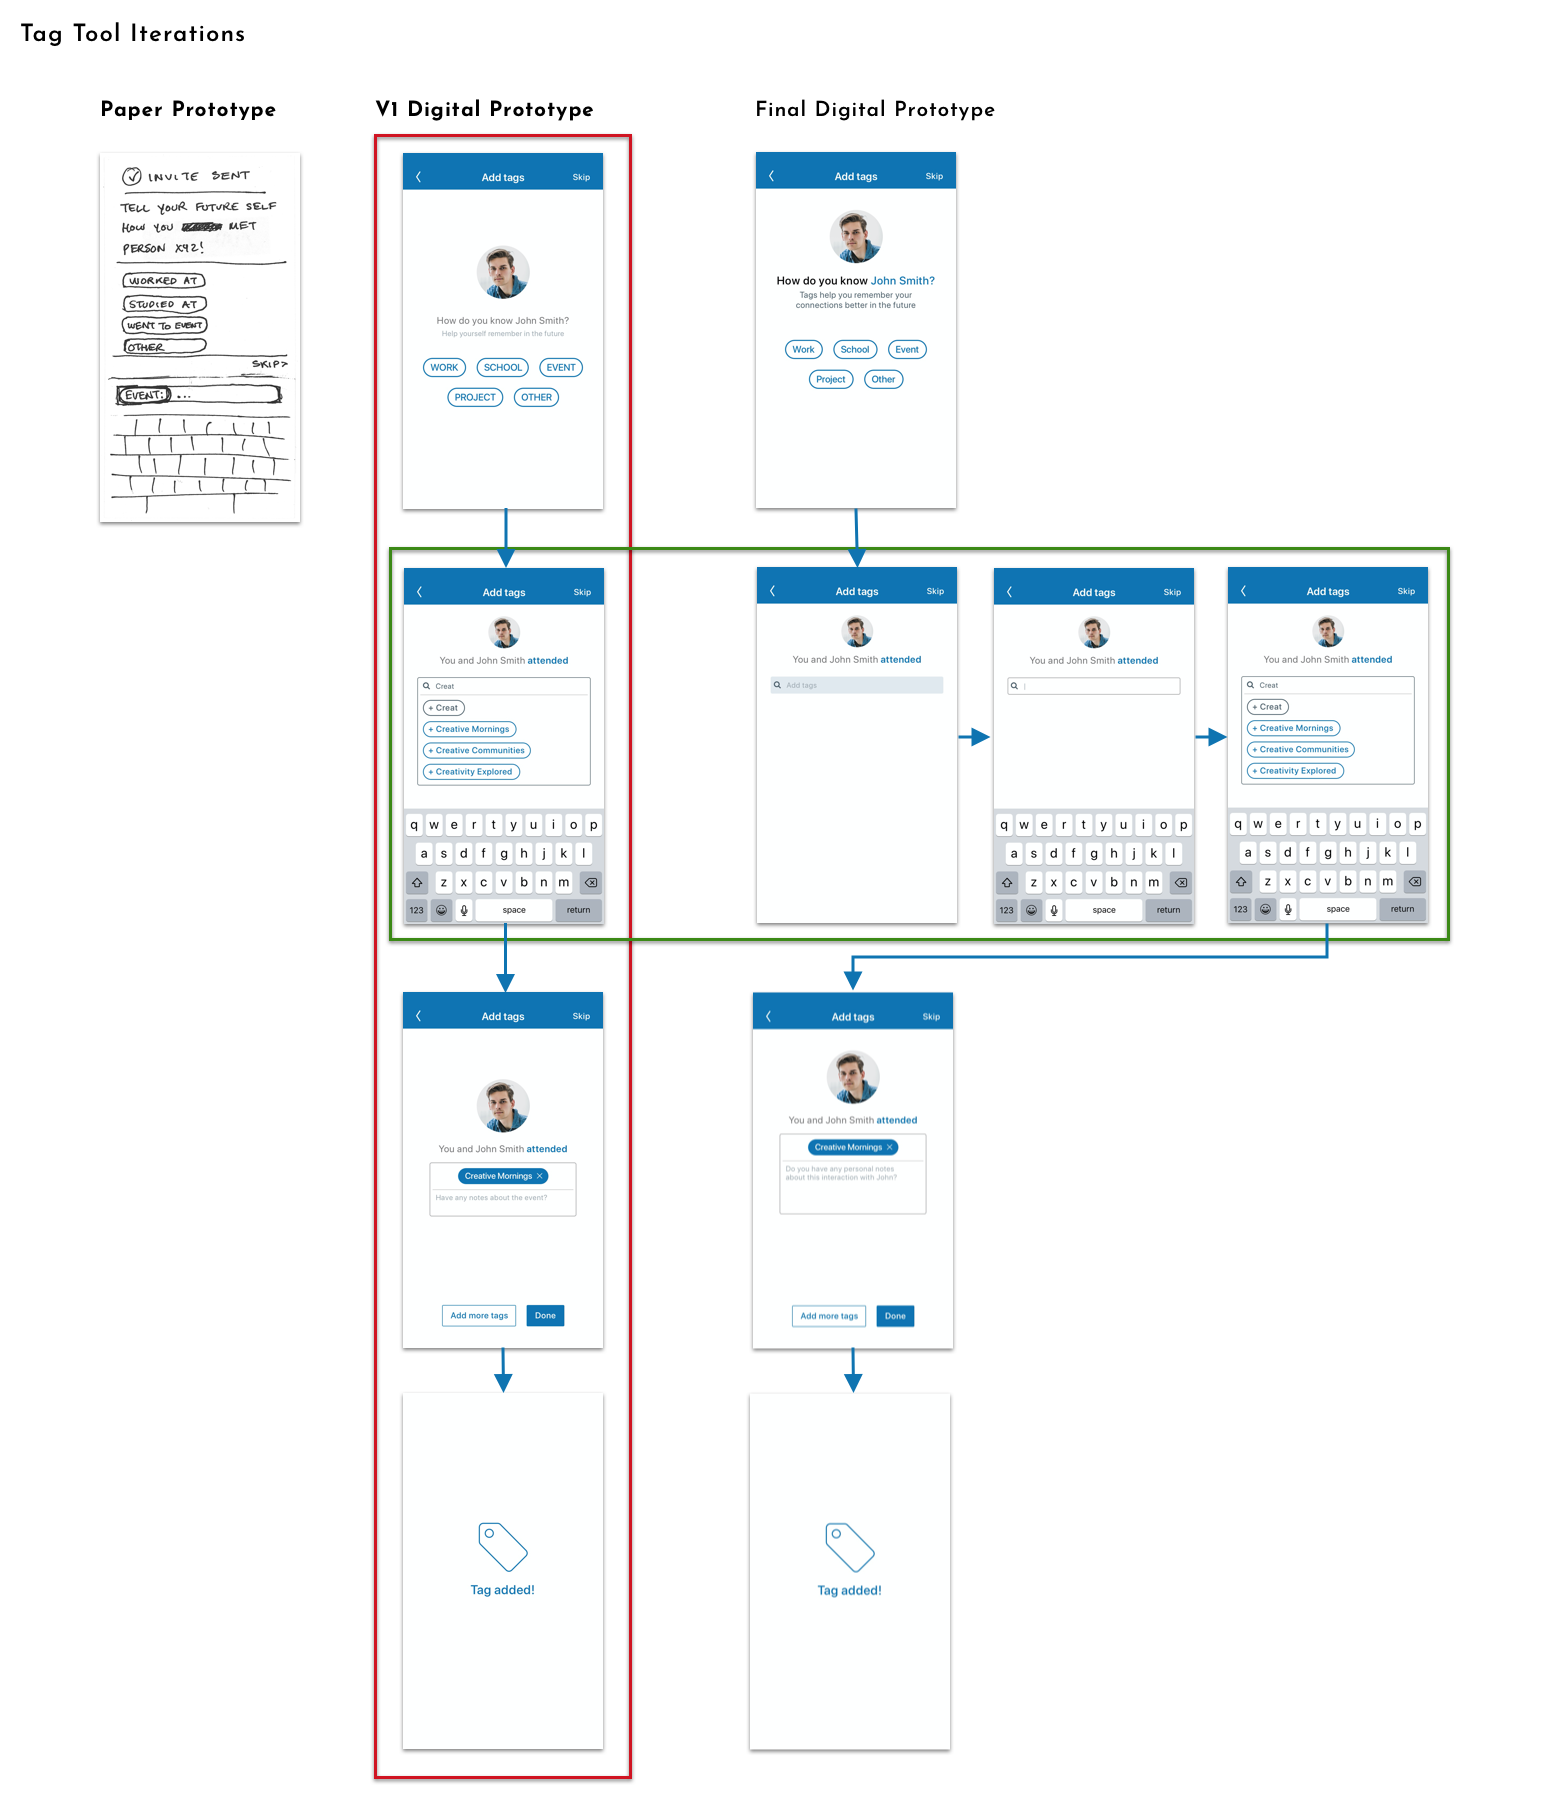 Comparison showing iterations of the Tagging Tool, from one page in the paper prototype, to 4 screens in the first draft of the digital prototype, to 7 screens in the final.